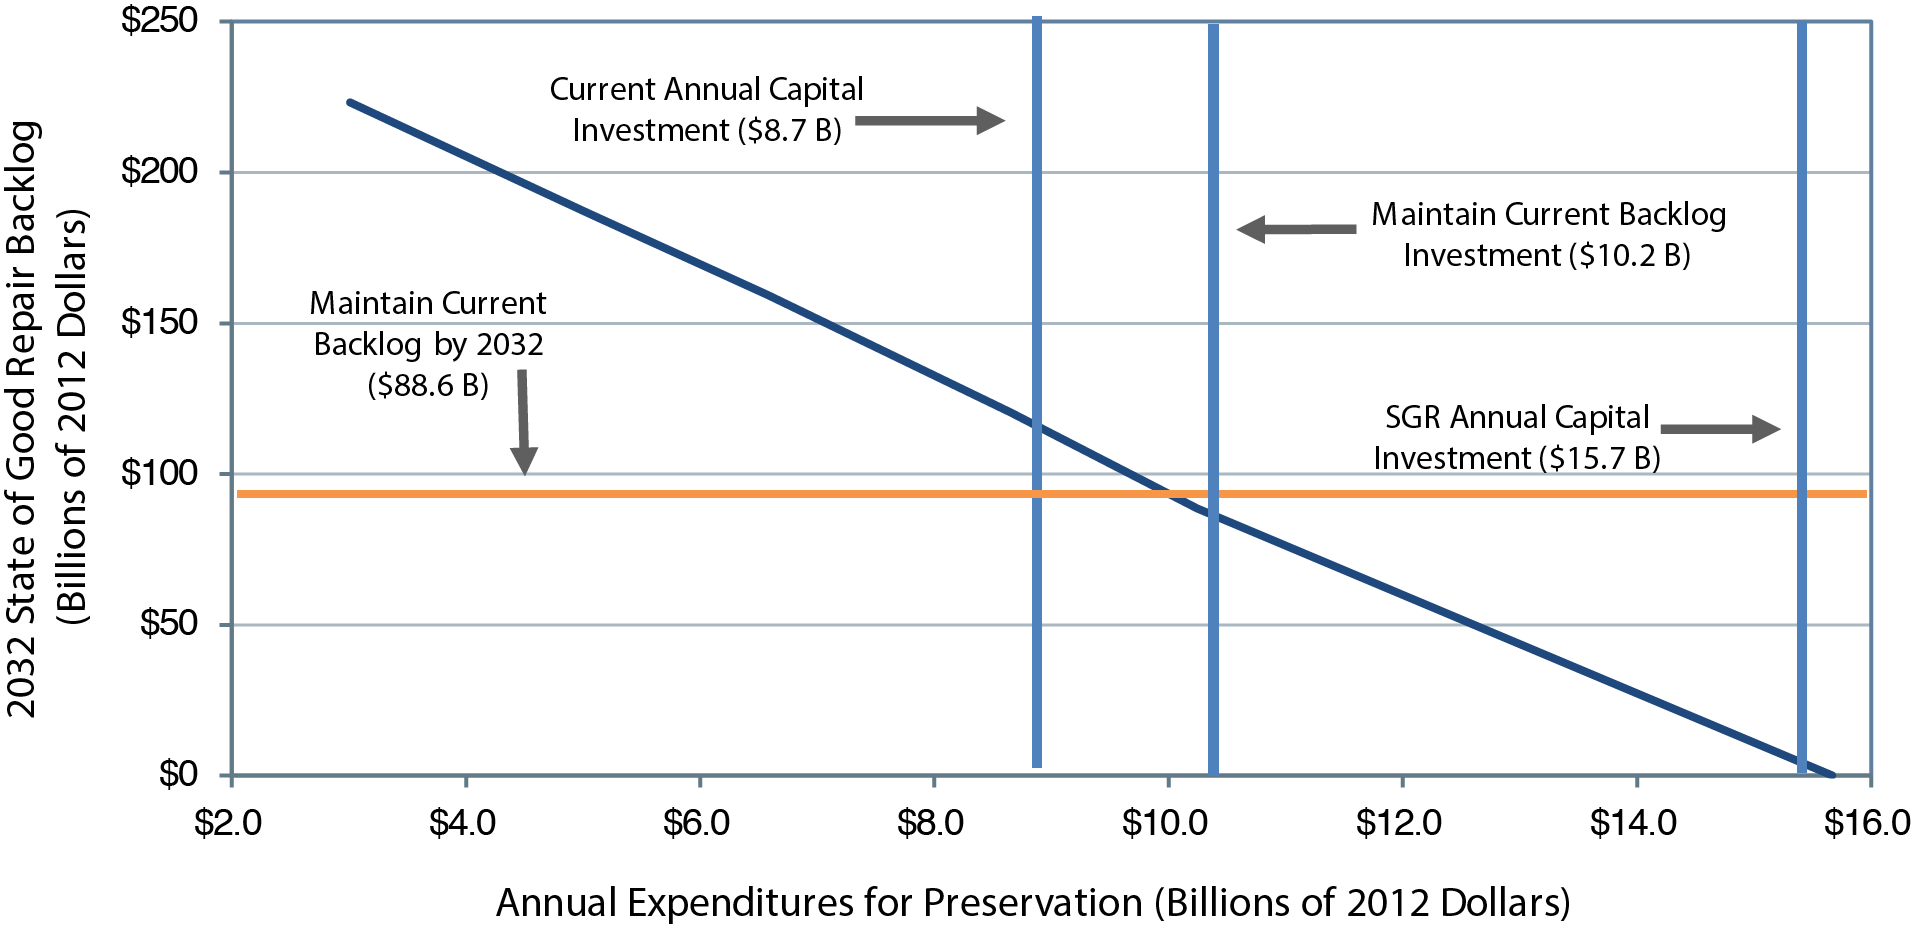 A line chart plots state of good repair backlog over annual expenditures for preservation in billions of 2012 dollars. The backlog value is $223.2 billion at an annual expenditure of $3.0 billion. The plot trends steadily downward to a backlog of zero at an annual expenditure of $15.7 billion. The plot intersects at an annual capital investment of $8.7 billion with a backlog of $120.5 billion, and reaches the current backlog of $88.6 billion with annual expenditures of 10.2 billion. Source: Transit Economic Requirements Model.